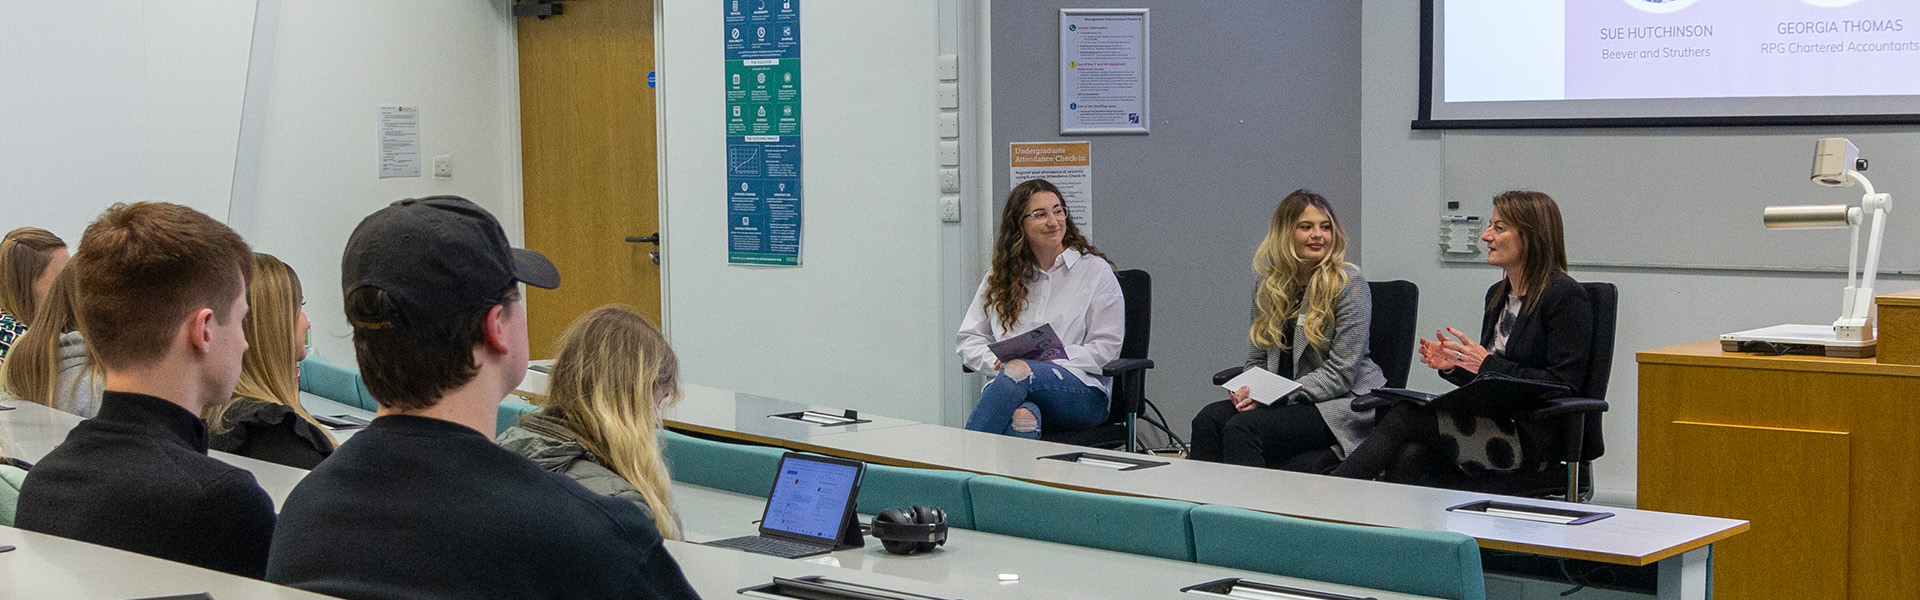 Beth Jones hosting an Accounting Society event in a Management School lecture theatre